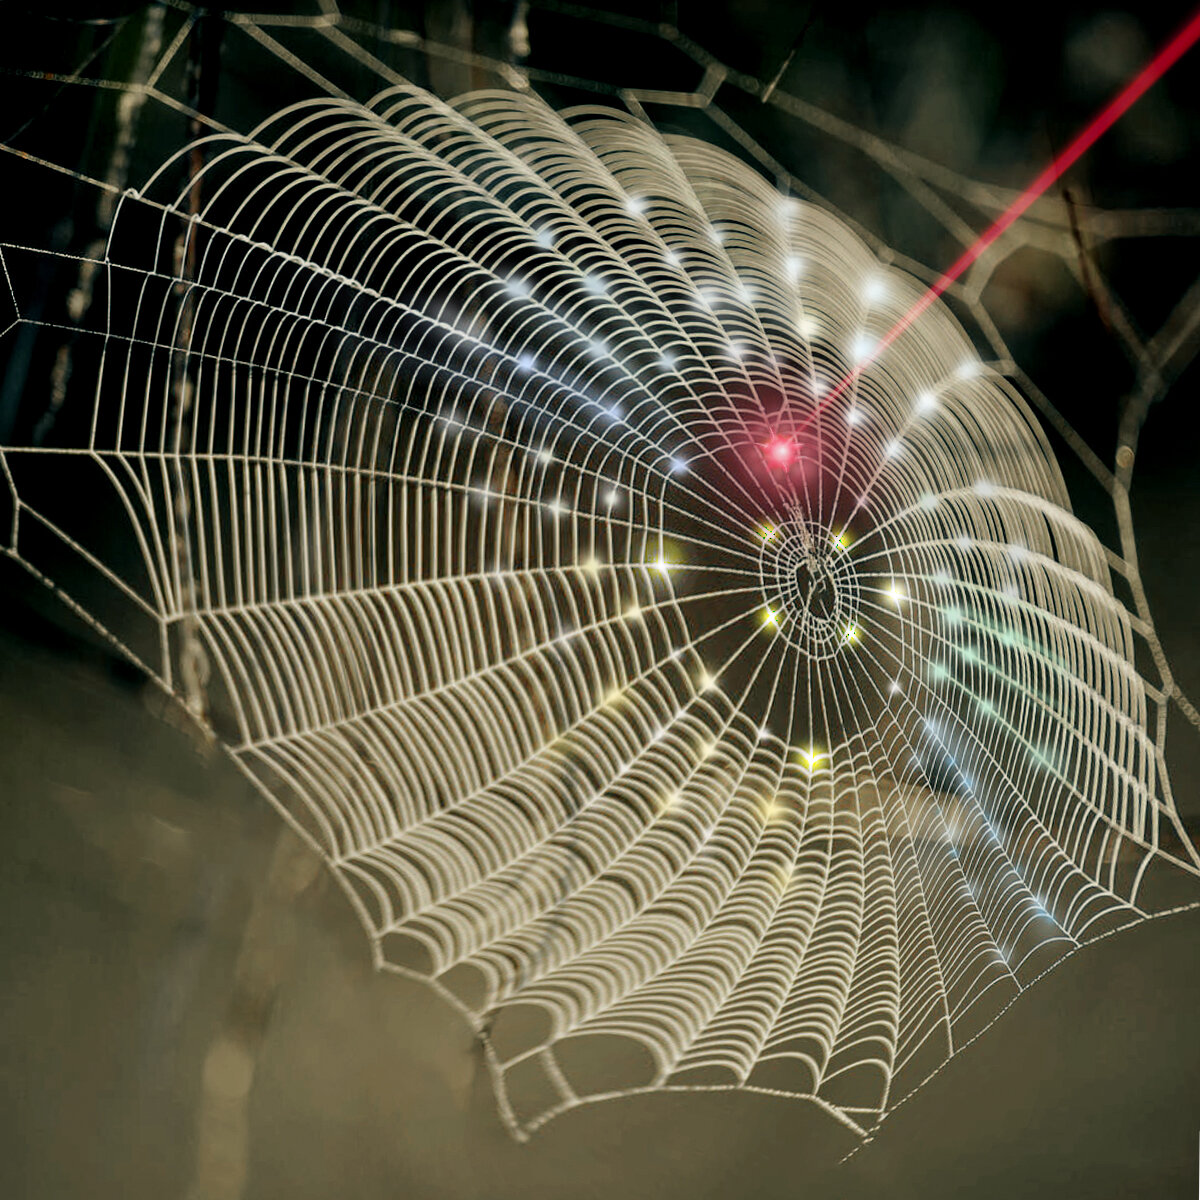 innovation-spins-spider-web-architecture-into-3-d-imaging-technology